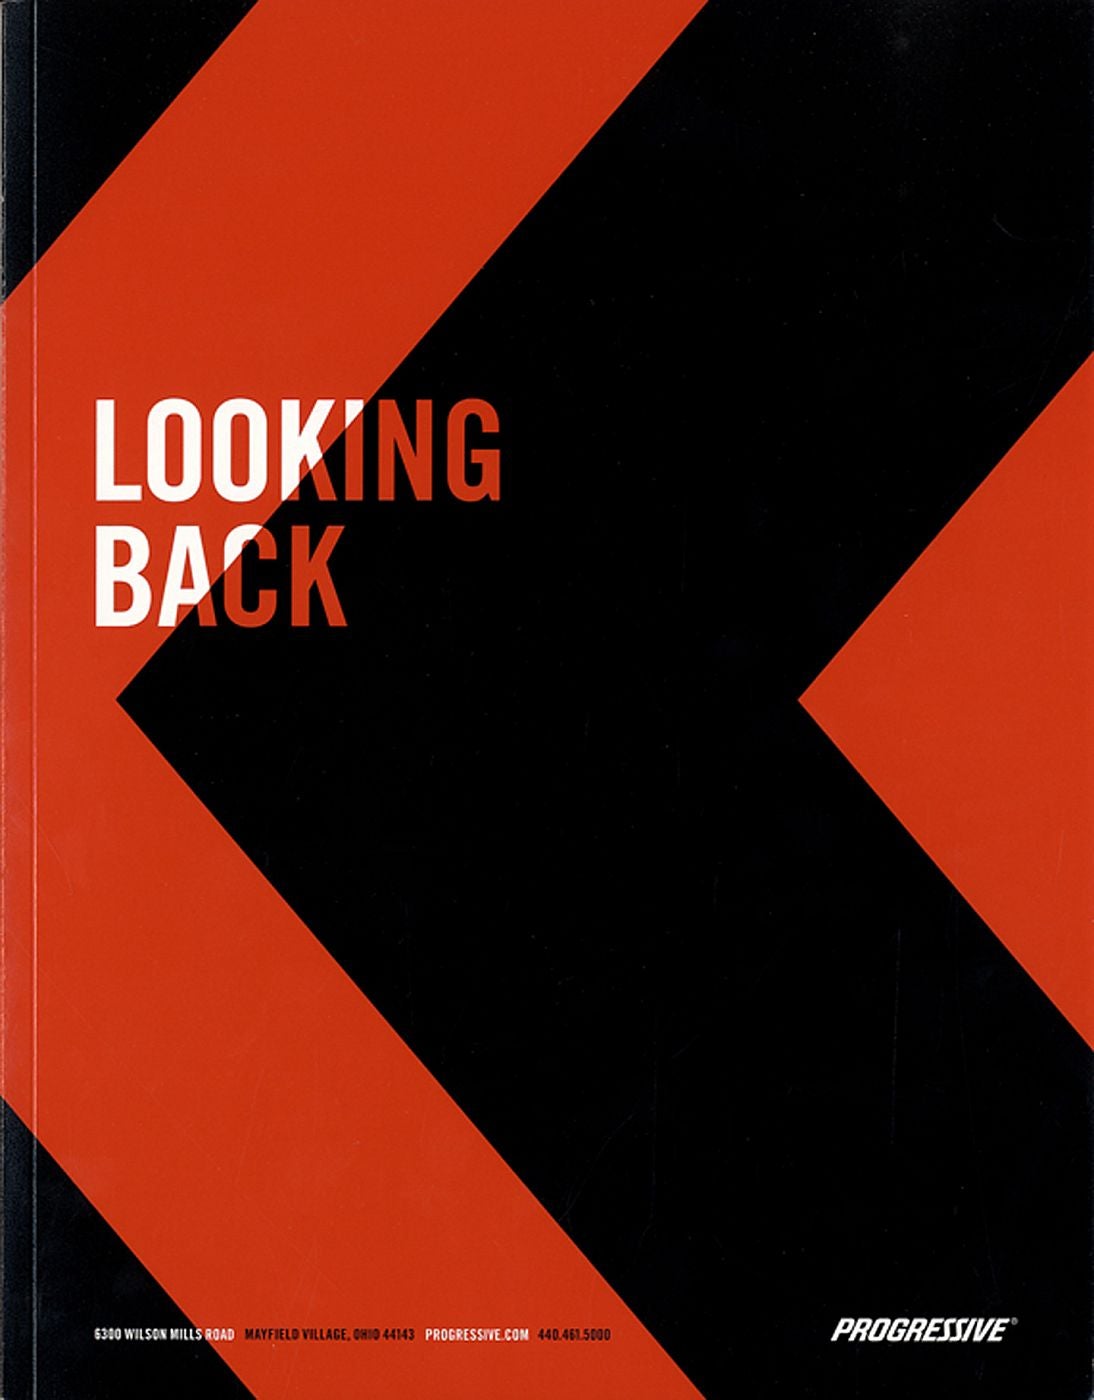 The Progressive Corporation 2014 Annual Report: Destination Ahead, Looking Back: Photographs by Lee Friedlander [SIGNED]